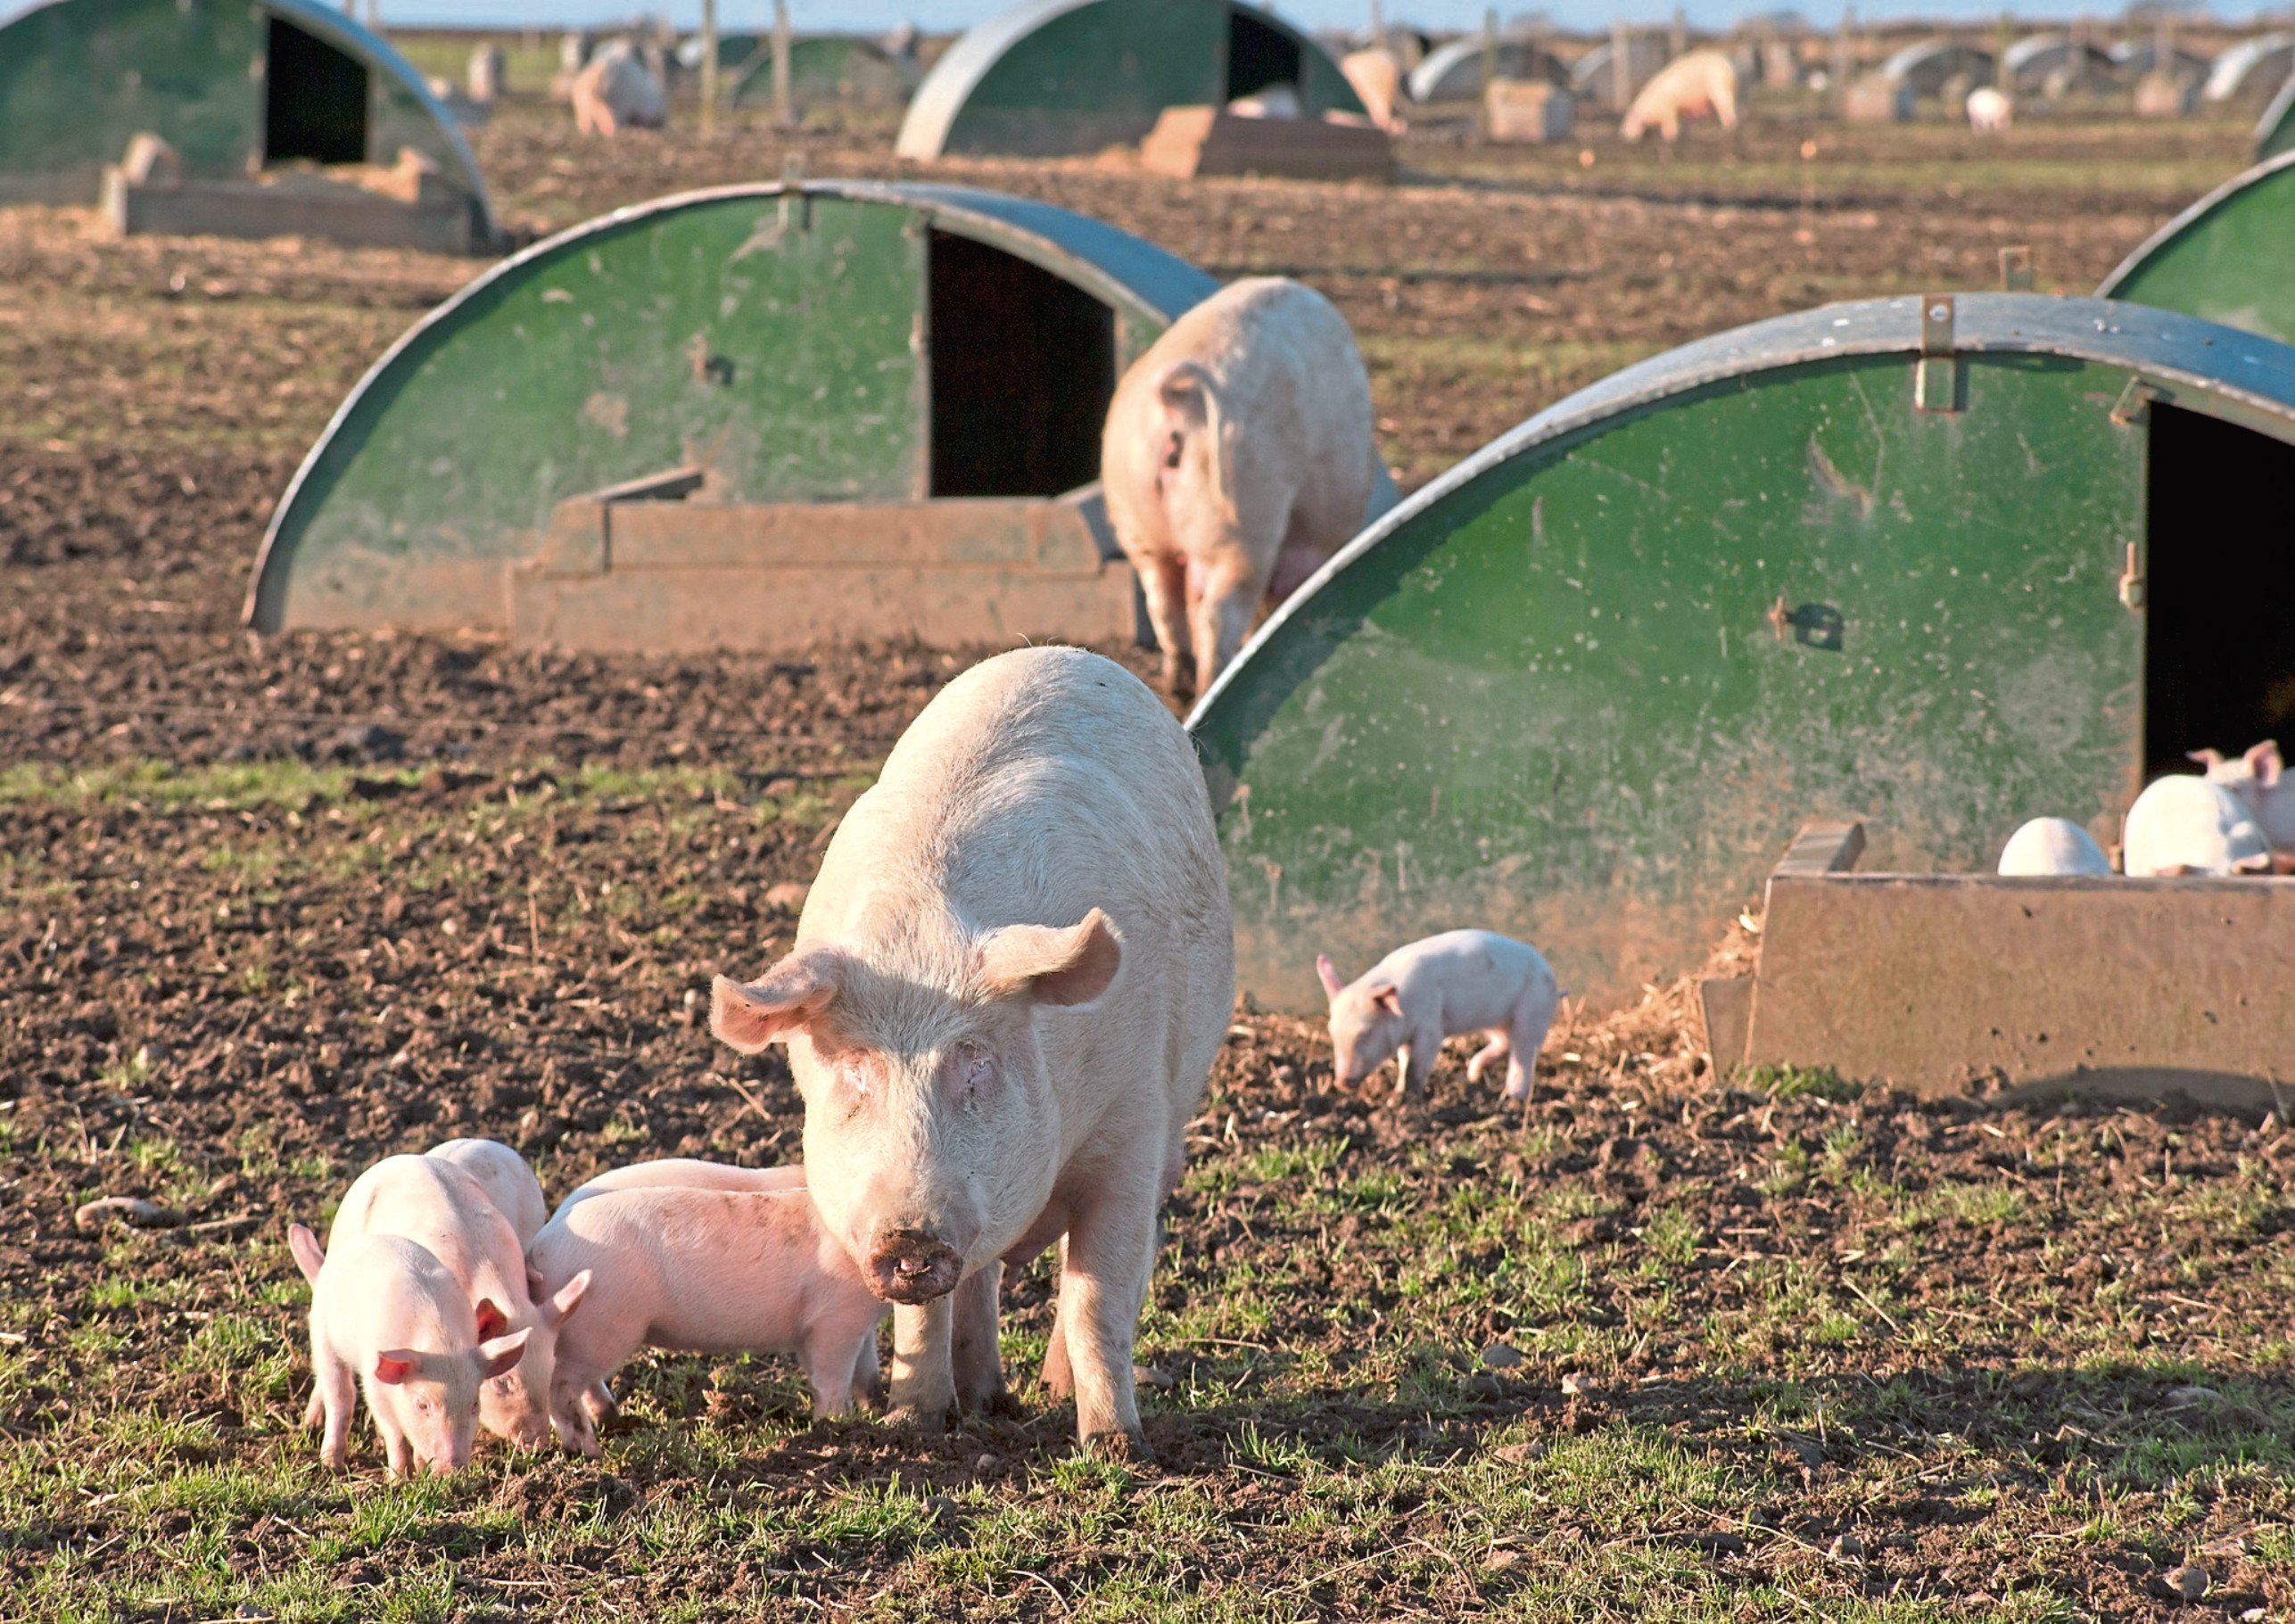 The risks are said to be especially high for outdoor pig producers who have rights of way passing through their land.